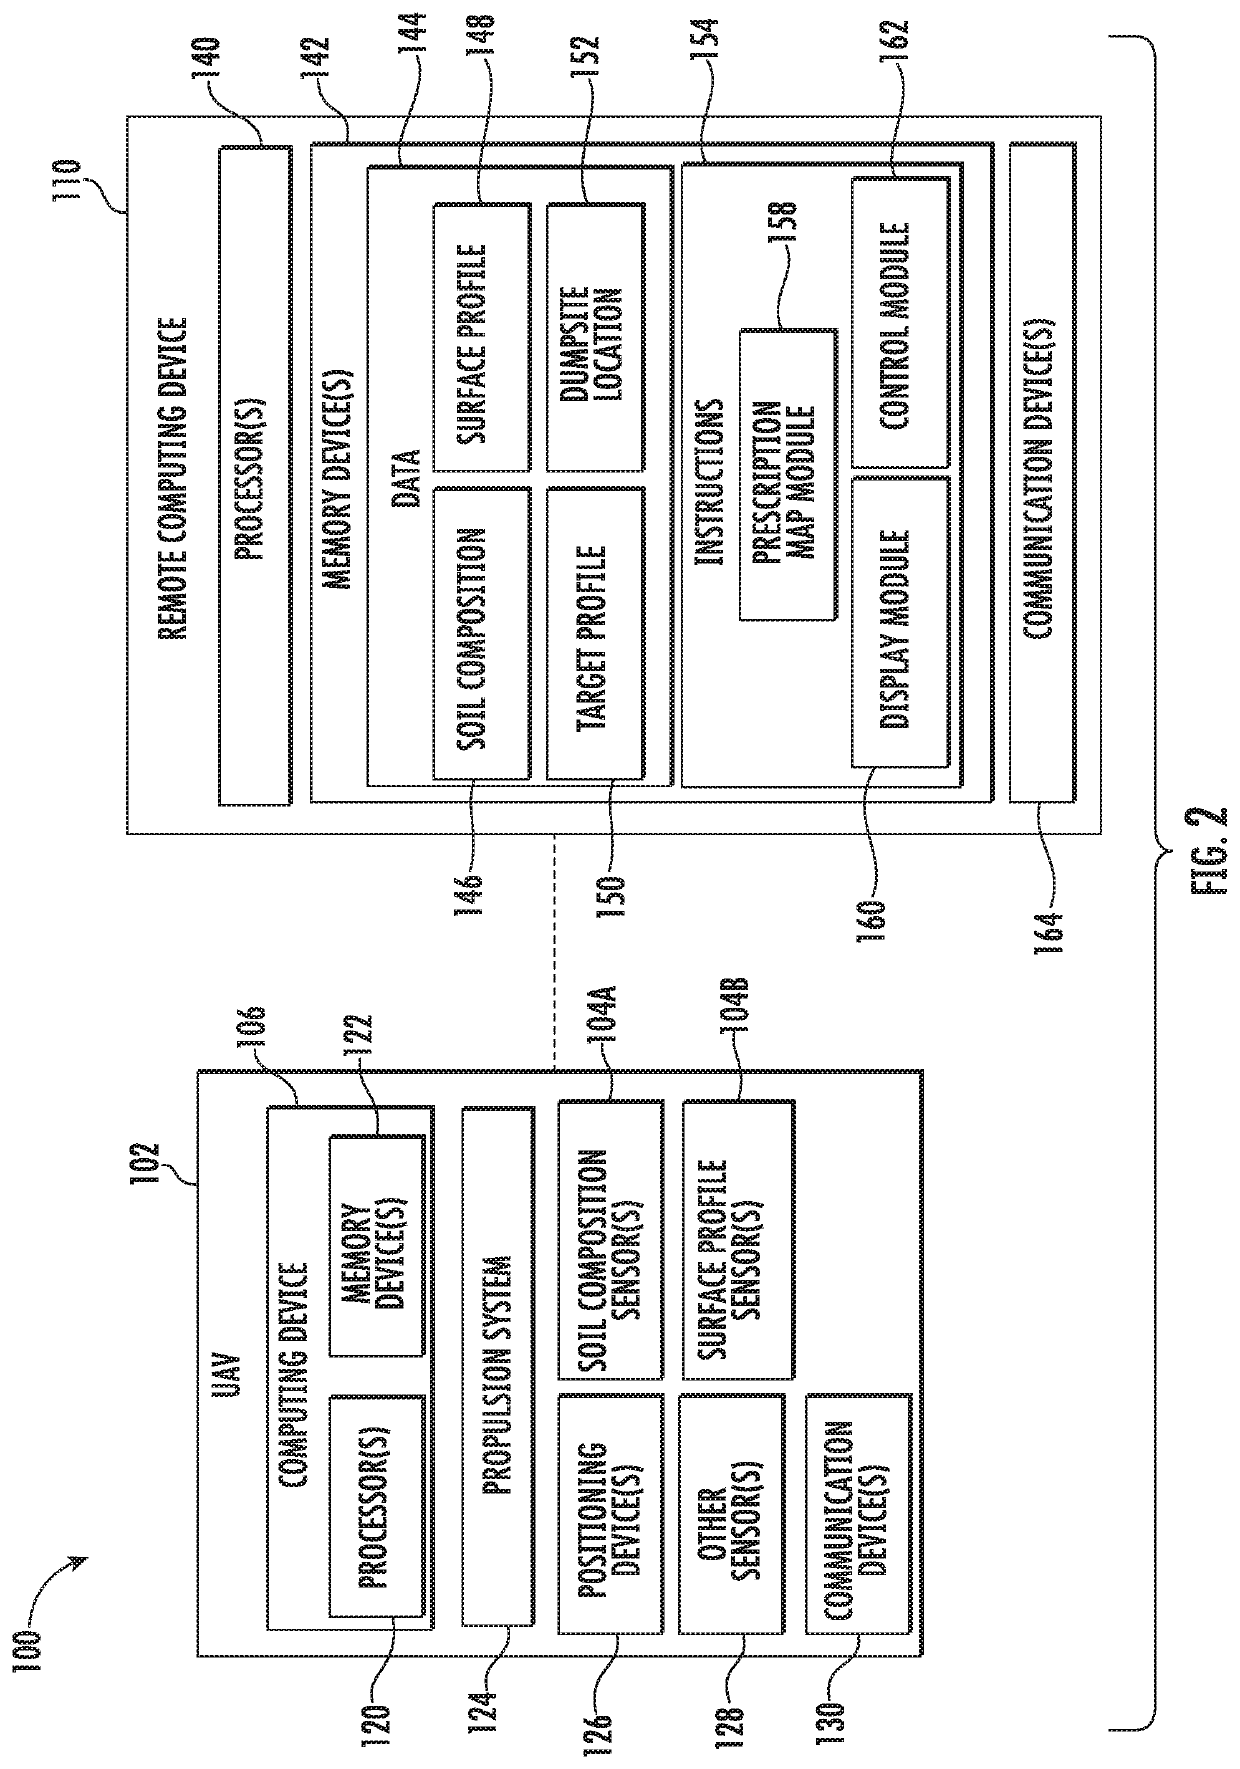 Systems and methods for generating earthmoving prescriptions